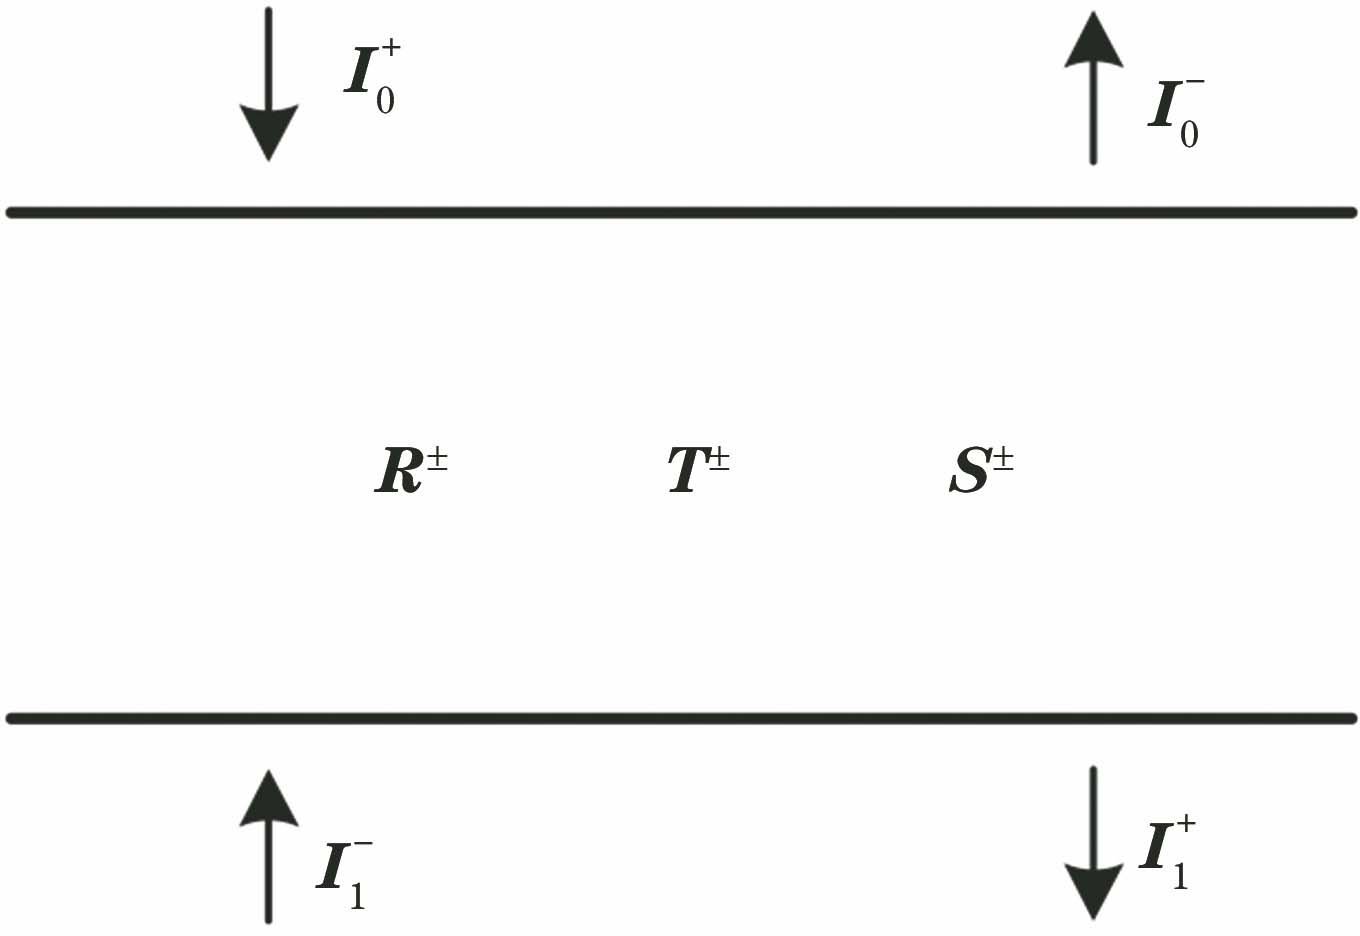 Schematic diagram of the interaction principle between the medium layers